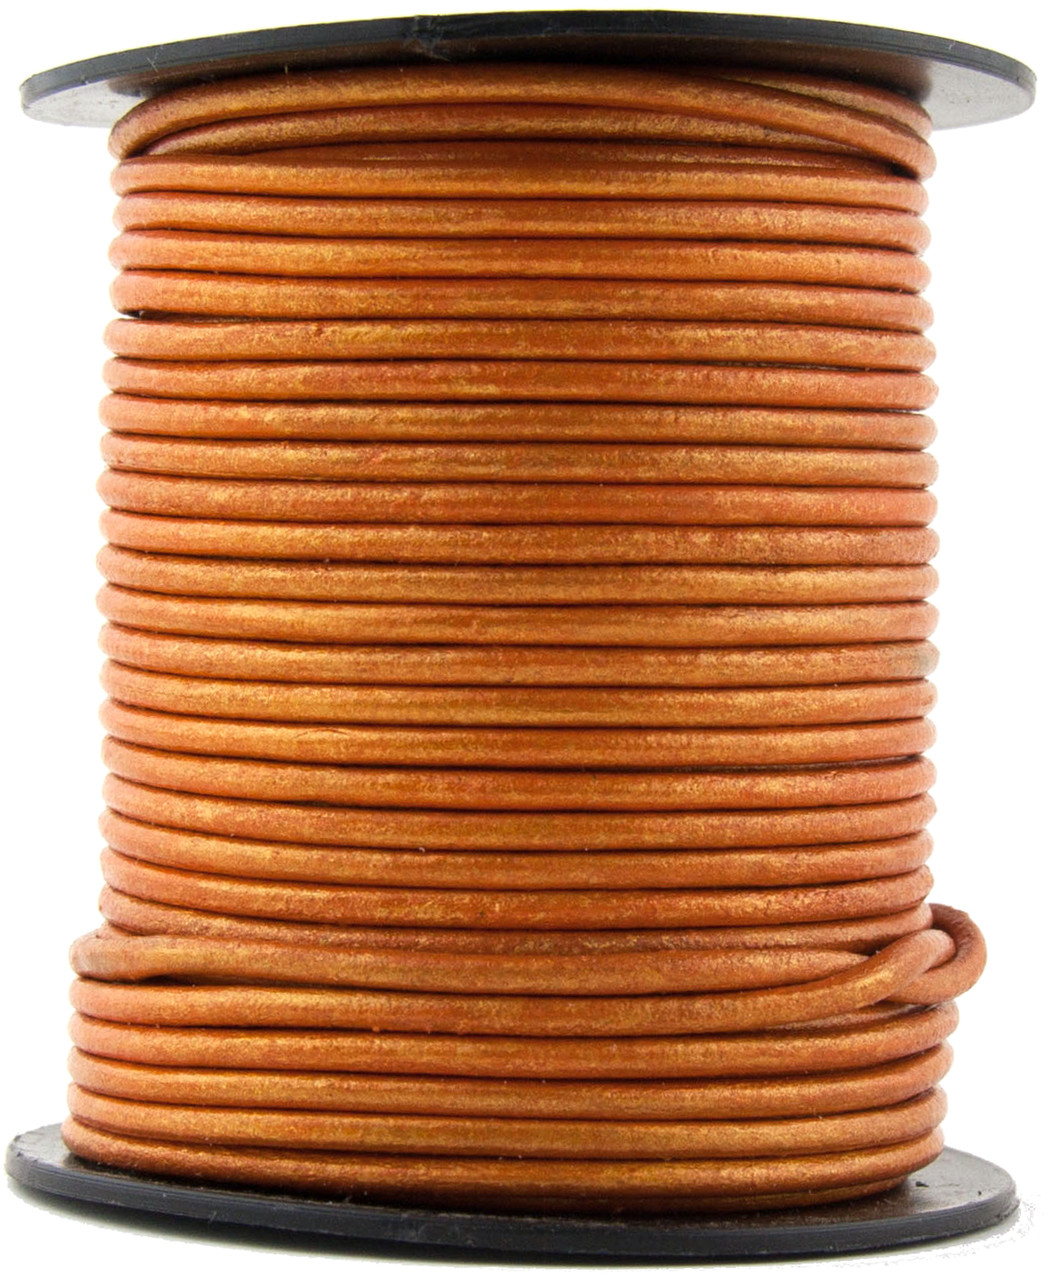 Leather Strings, Premium Leather Strings